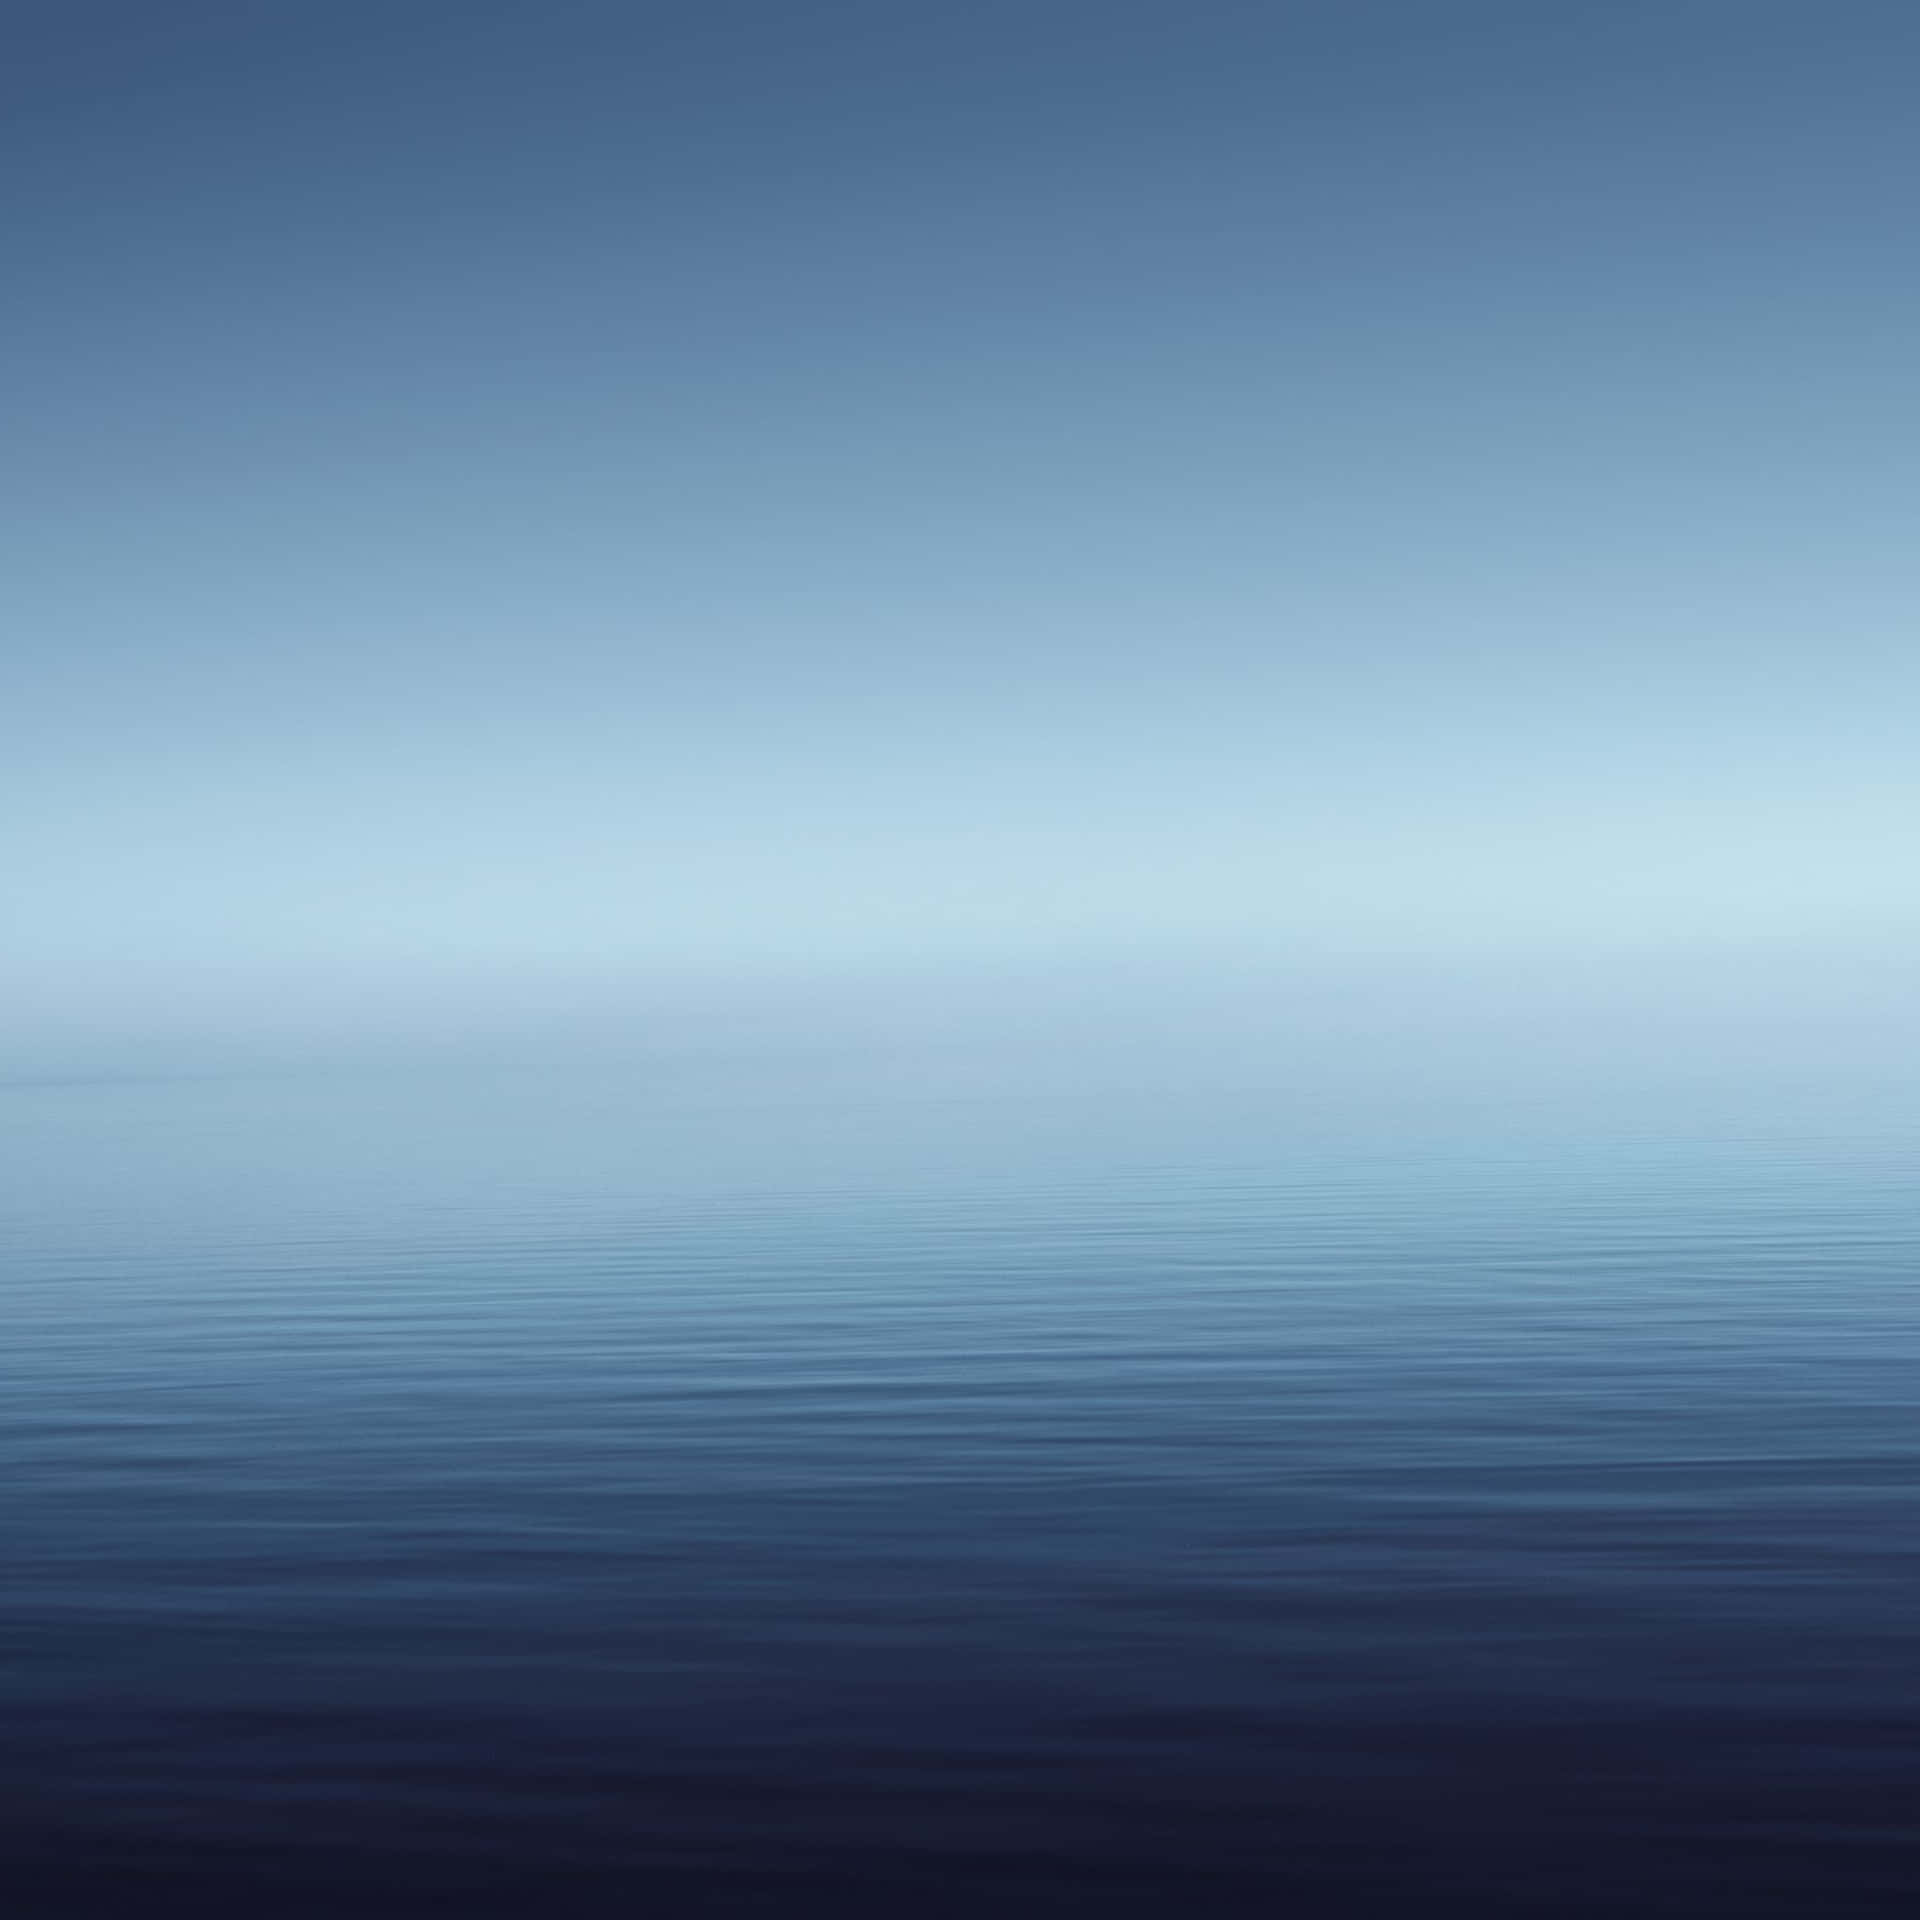 Calm Waters For Ios 3 Background